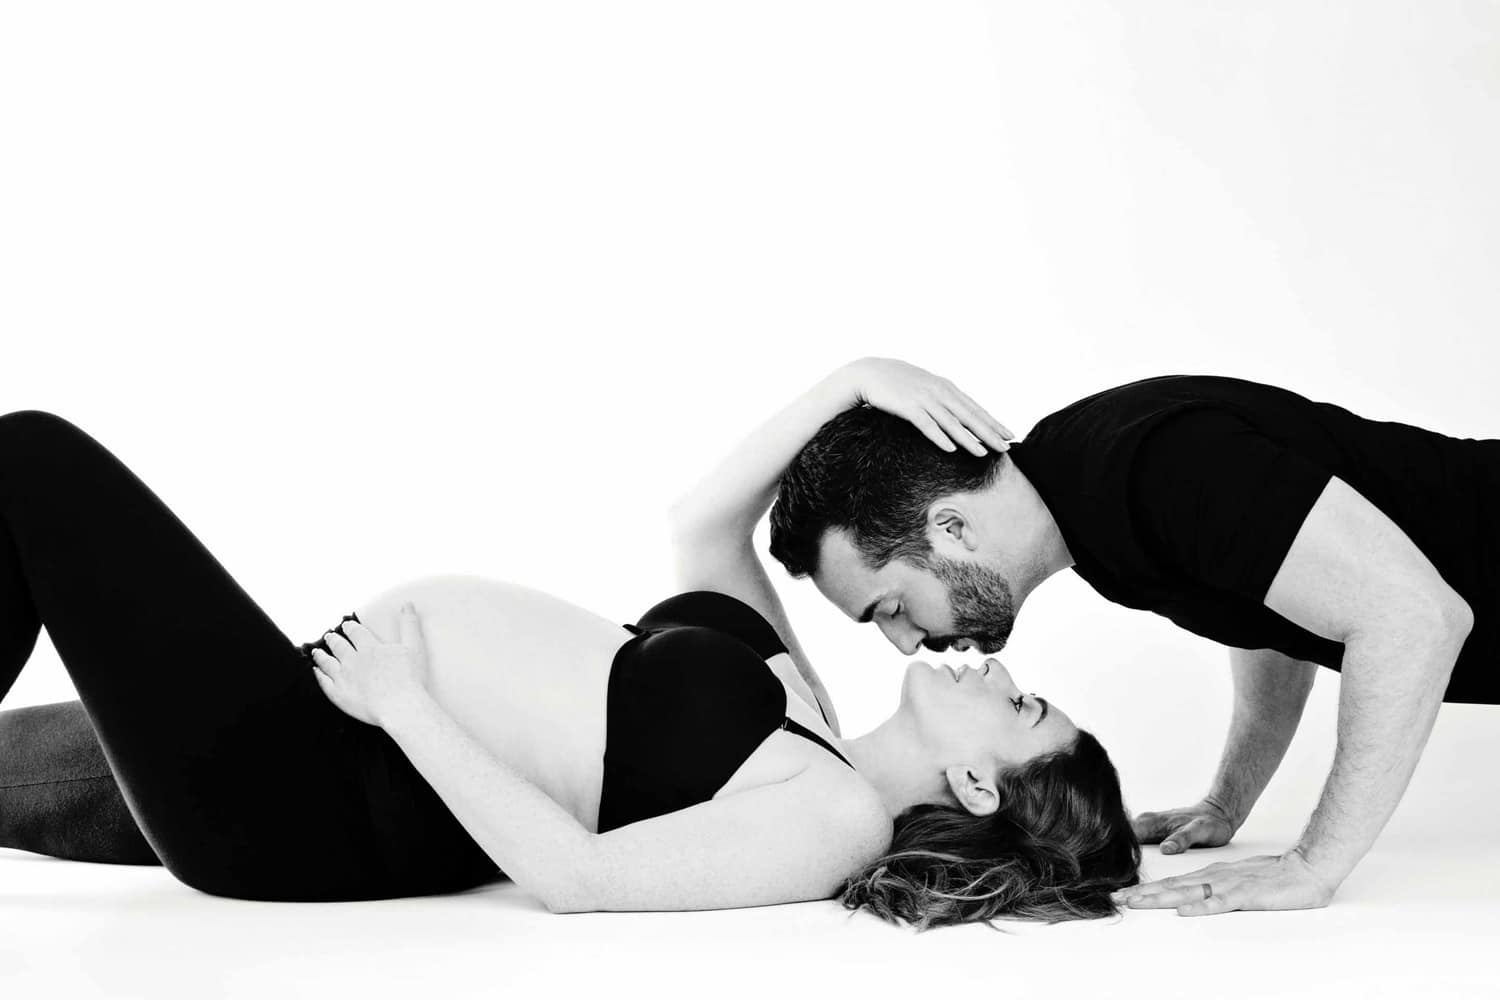 A man kisses his wife for a maternity protrait.